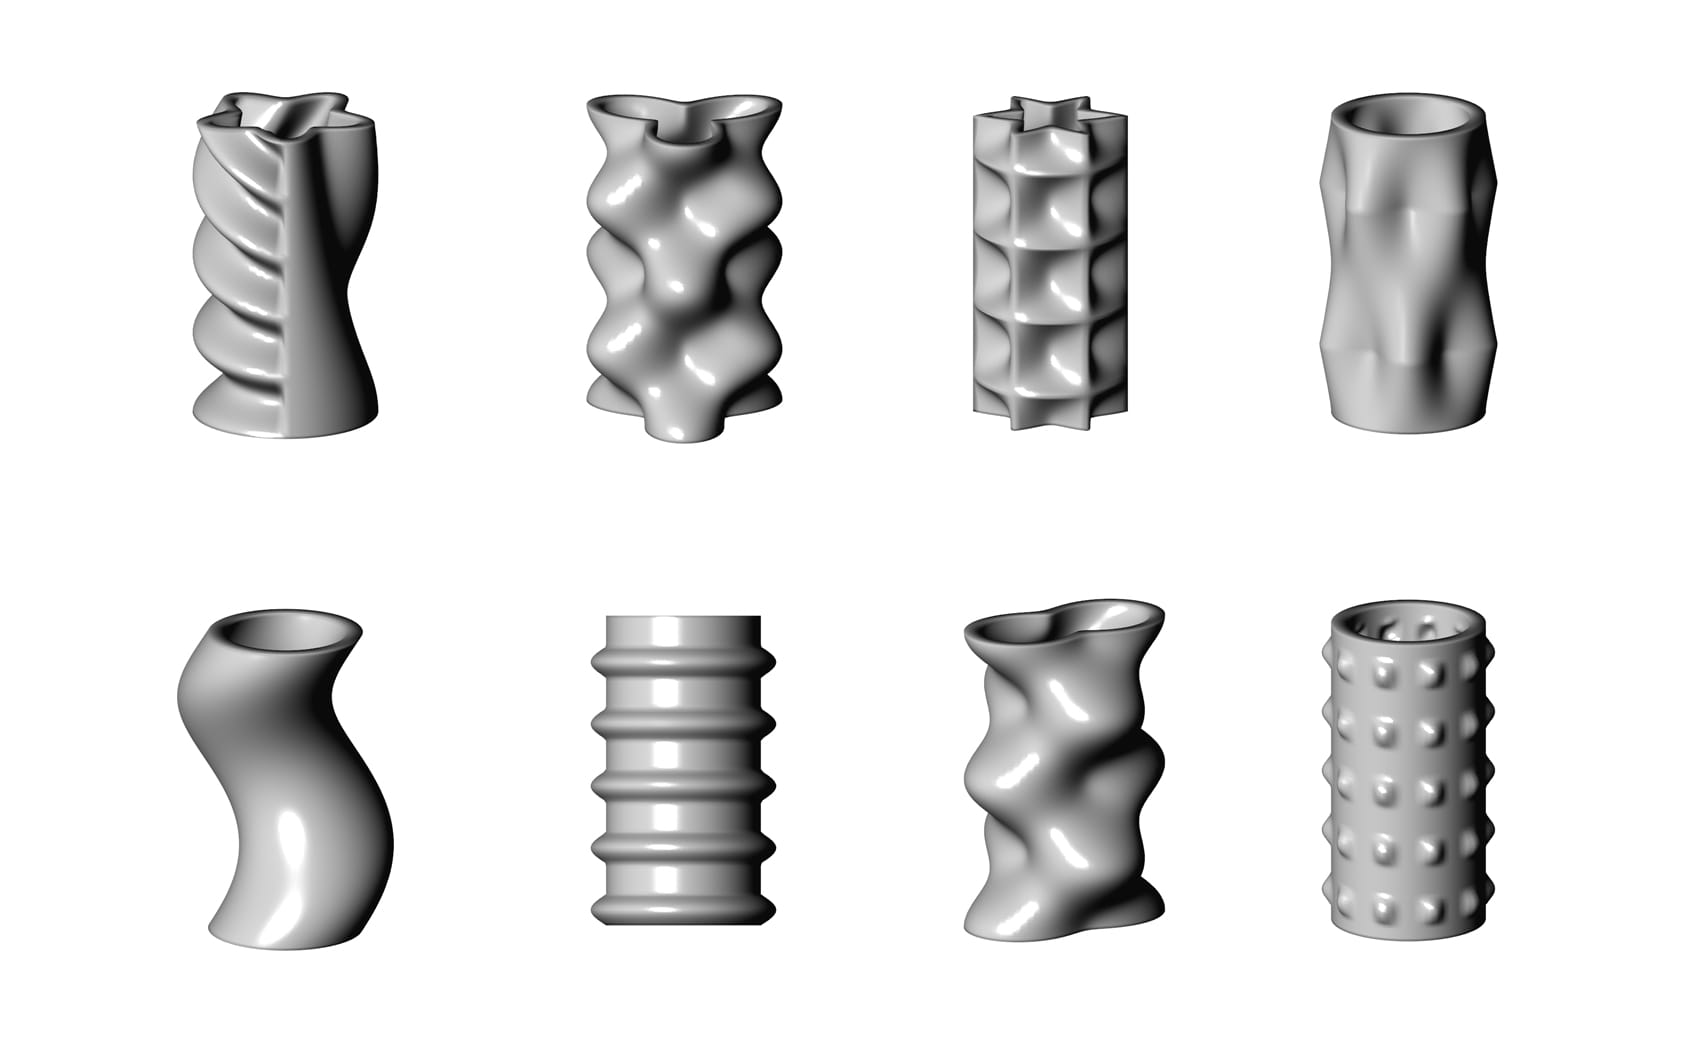  Examples of some of the shape-morphing effects possible in PotterDraw 